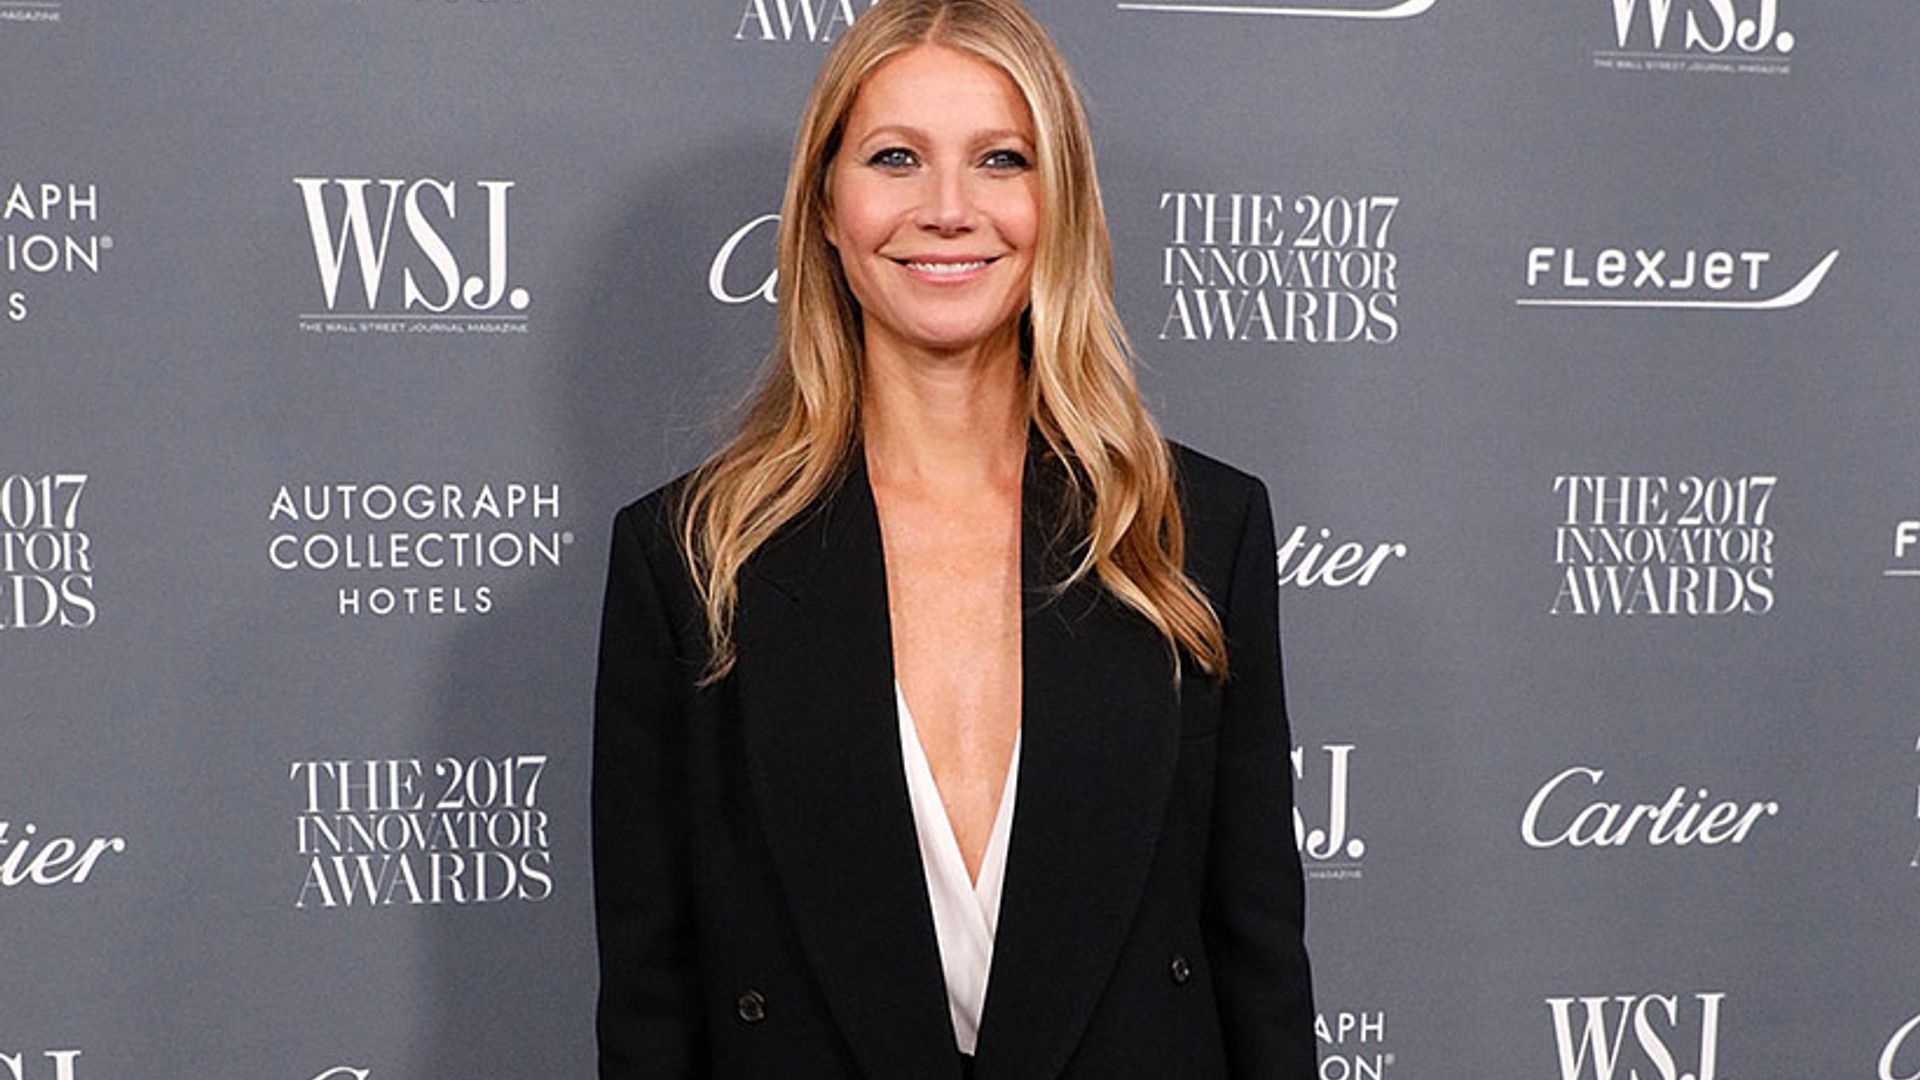 Gwyneth Paltrow reveals she is scared to wear her designer clothes